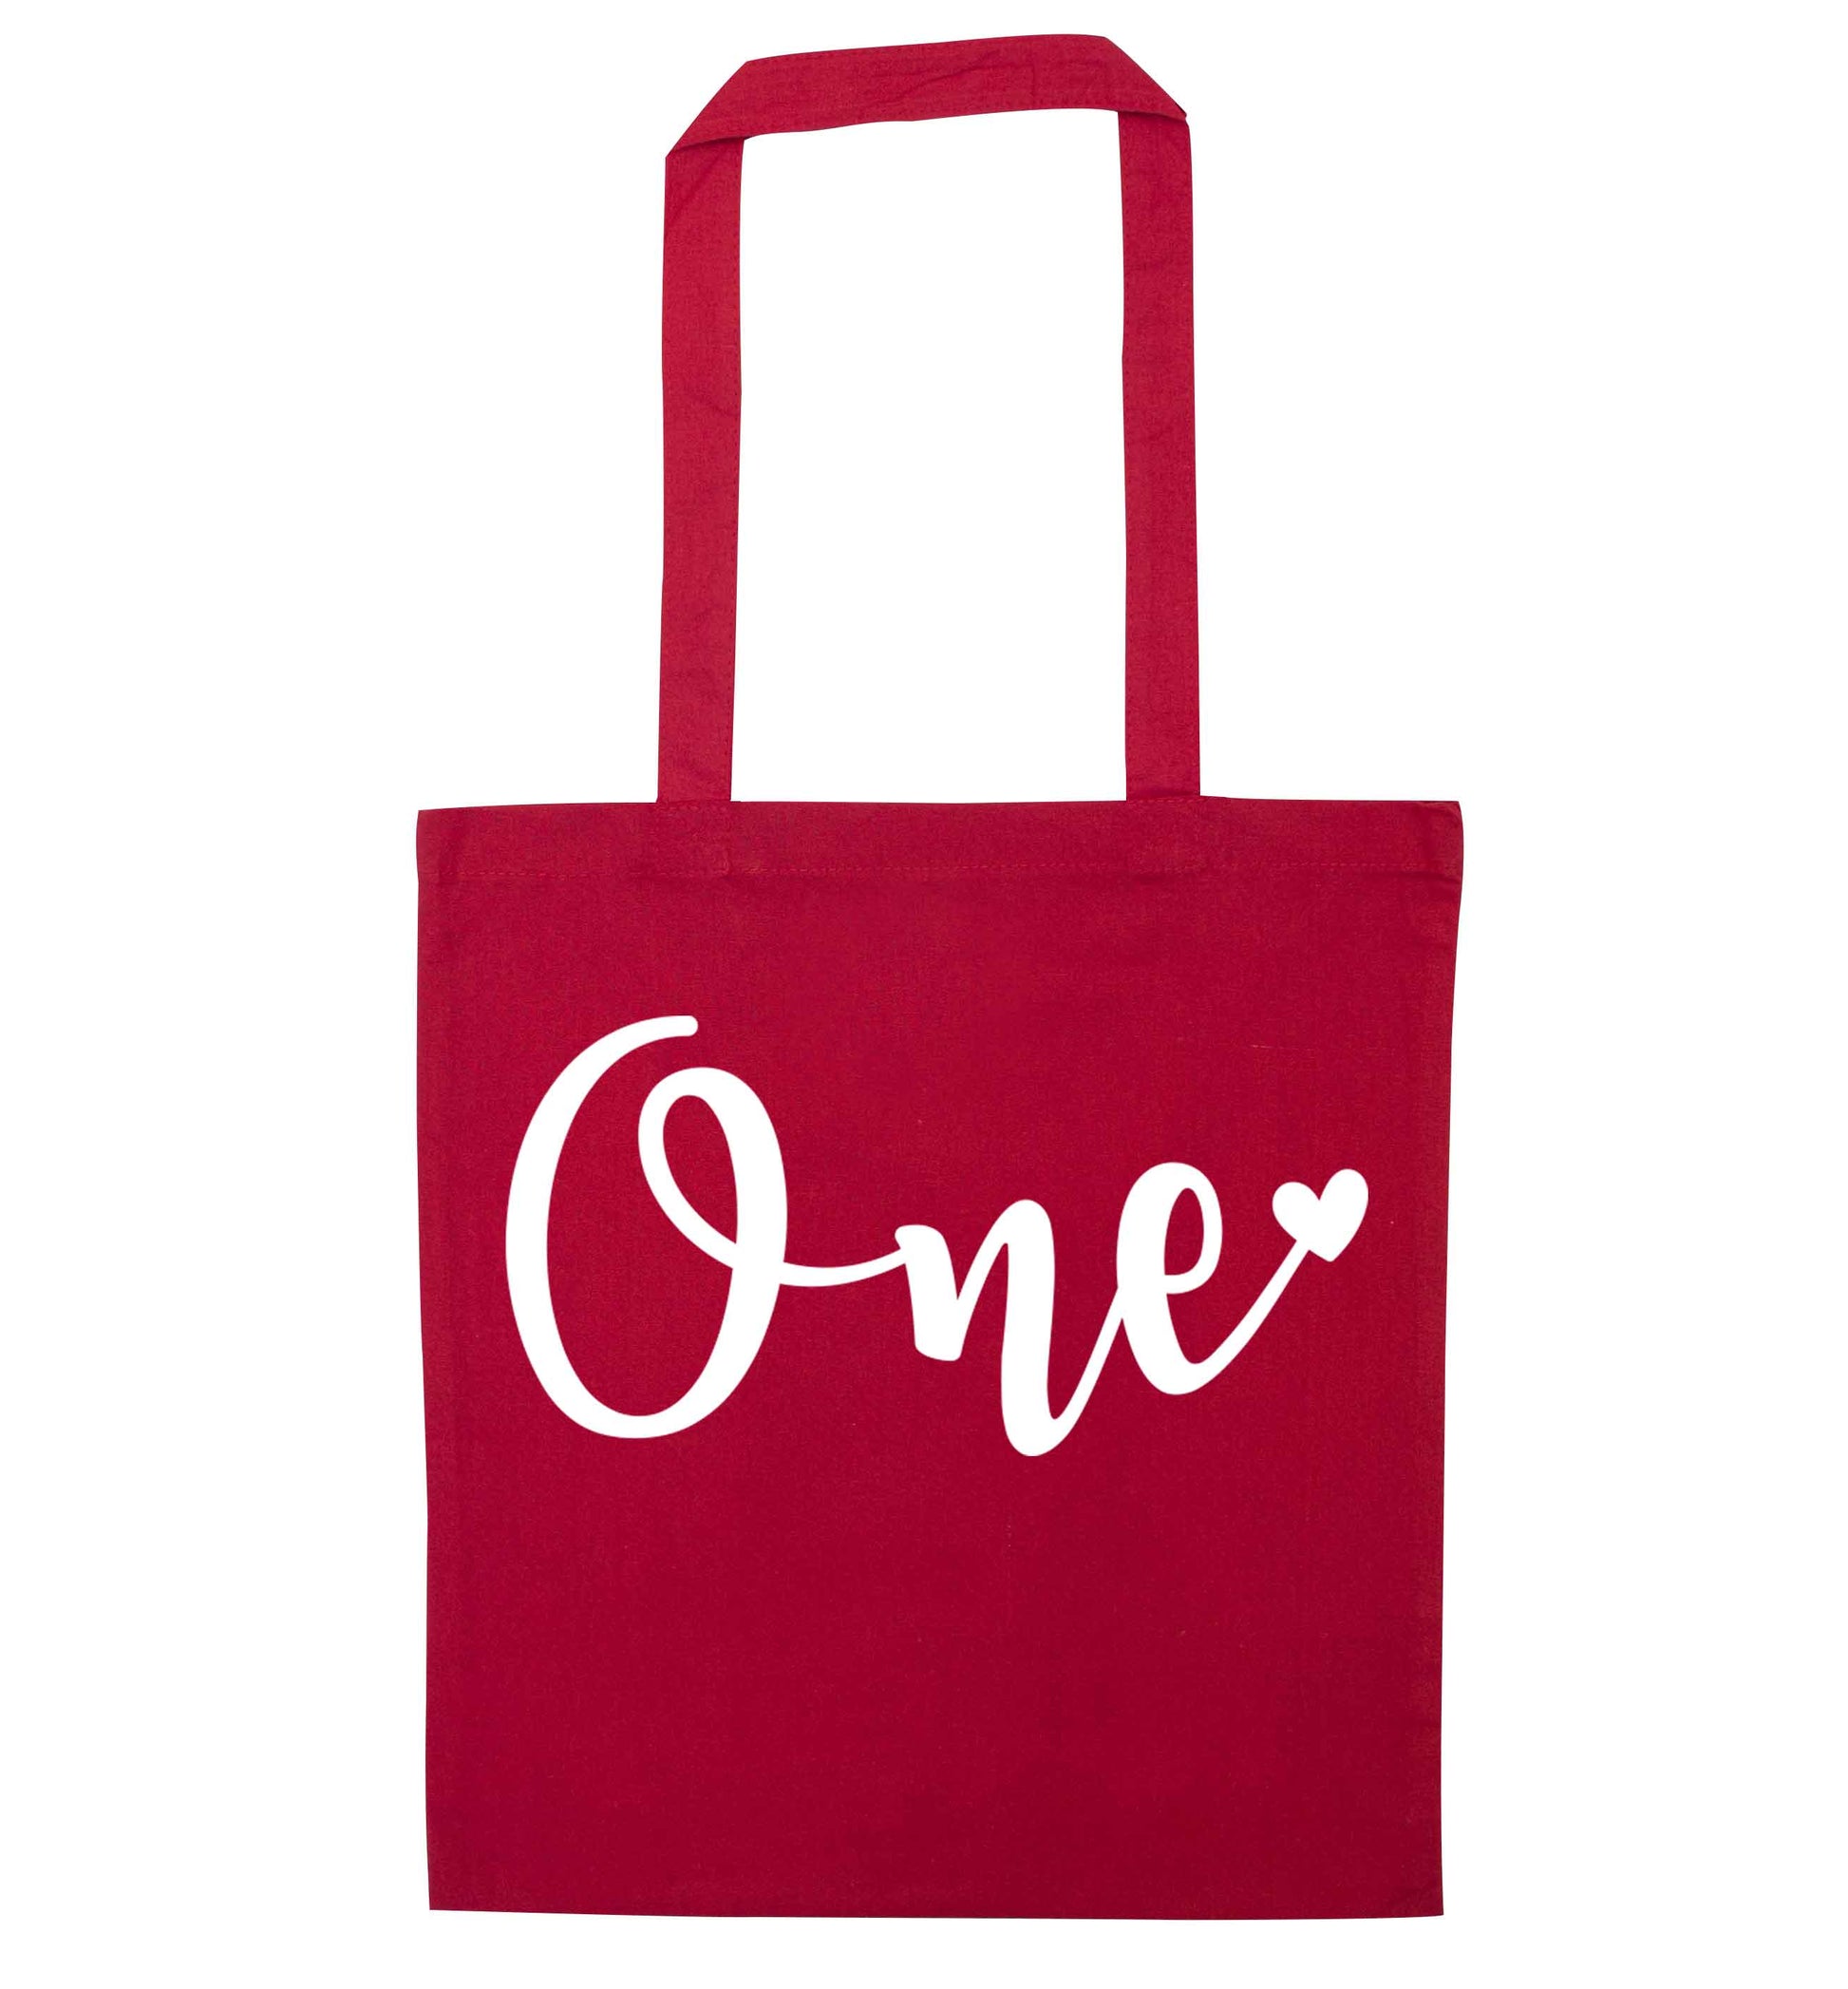 One red tote bag